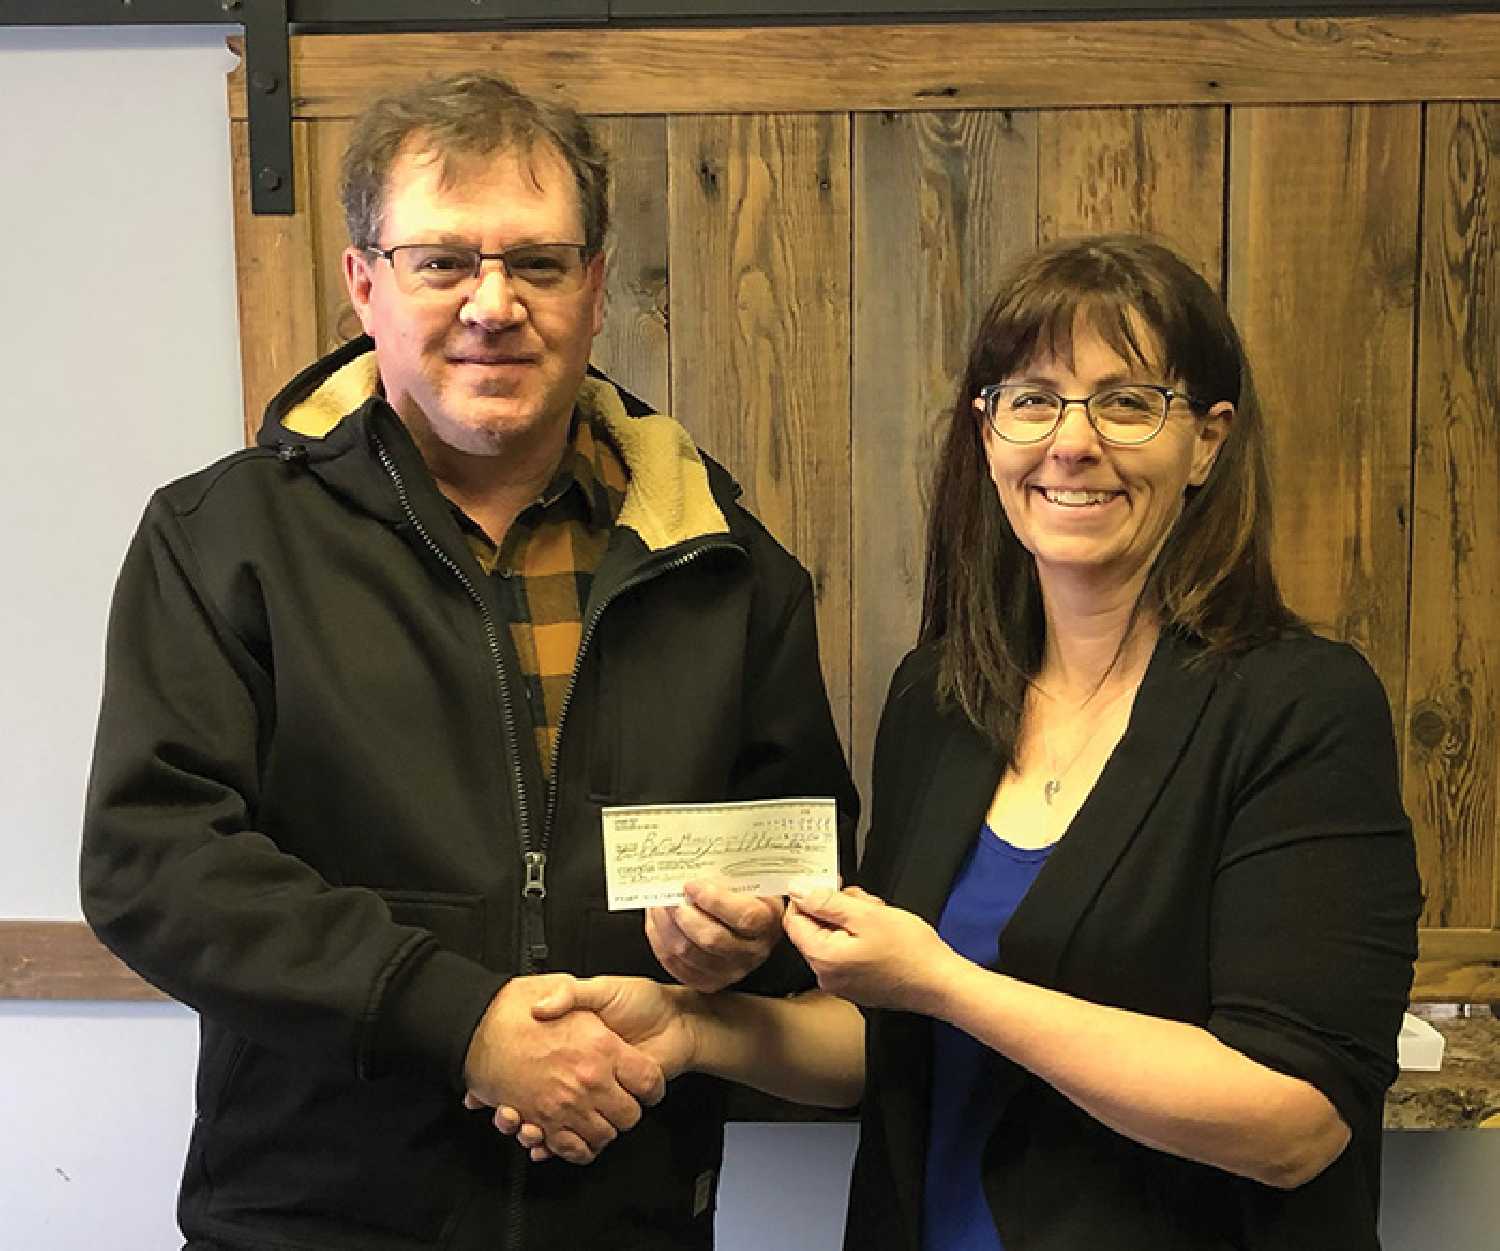 Craig Roy of Roy Farms has donated $25,000 to the Moosomin Airport Expansion Project. The airport expansion will allow the Moosomin Air Ambulance and corporate jets to access the Moosomin Region.